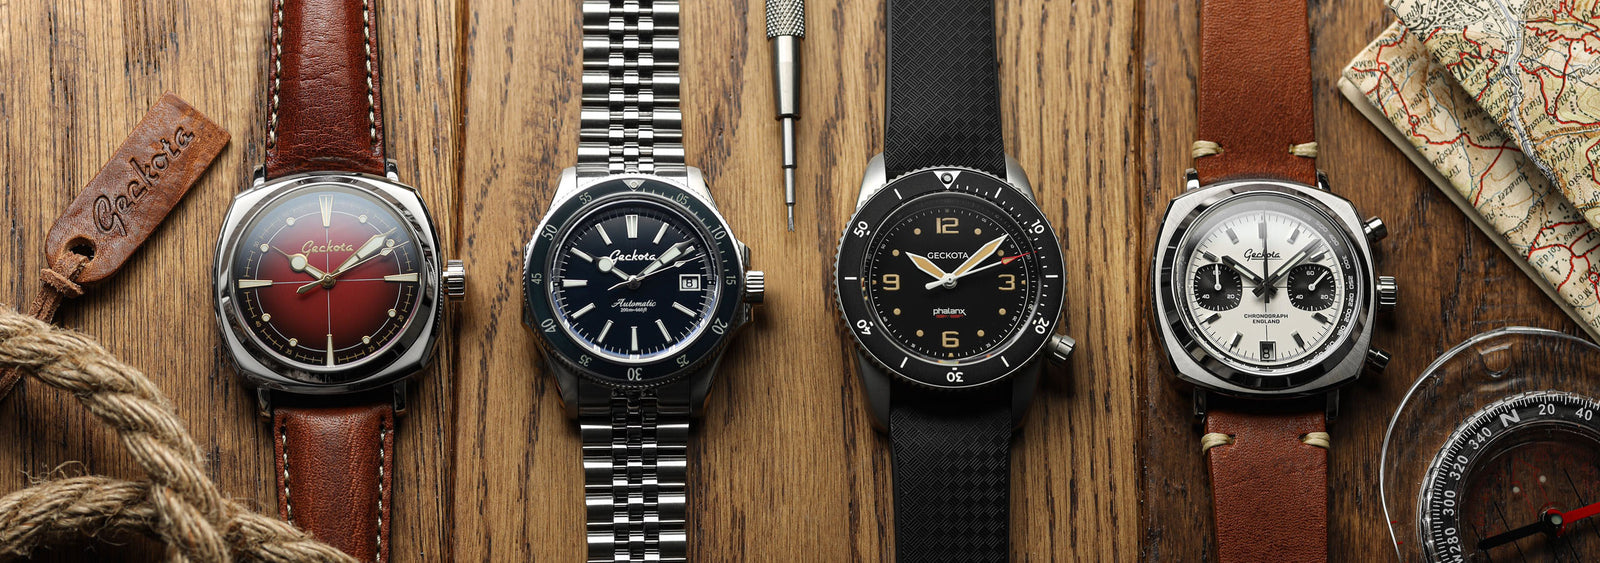 Featured Watches Page 2 - Geckota